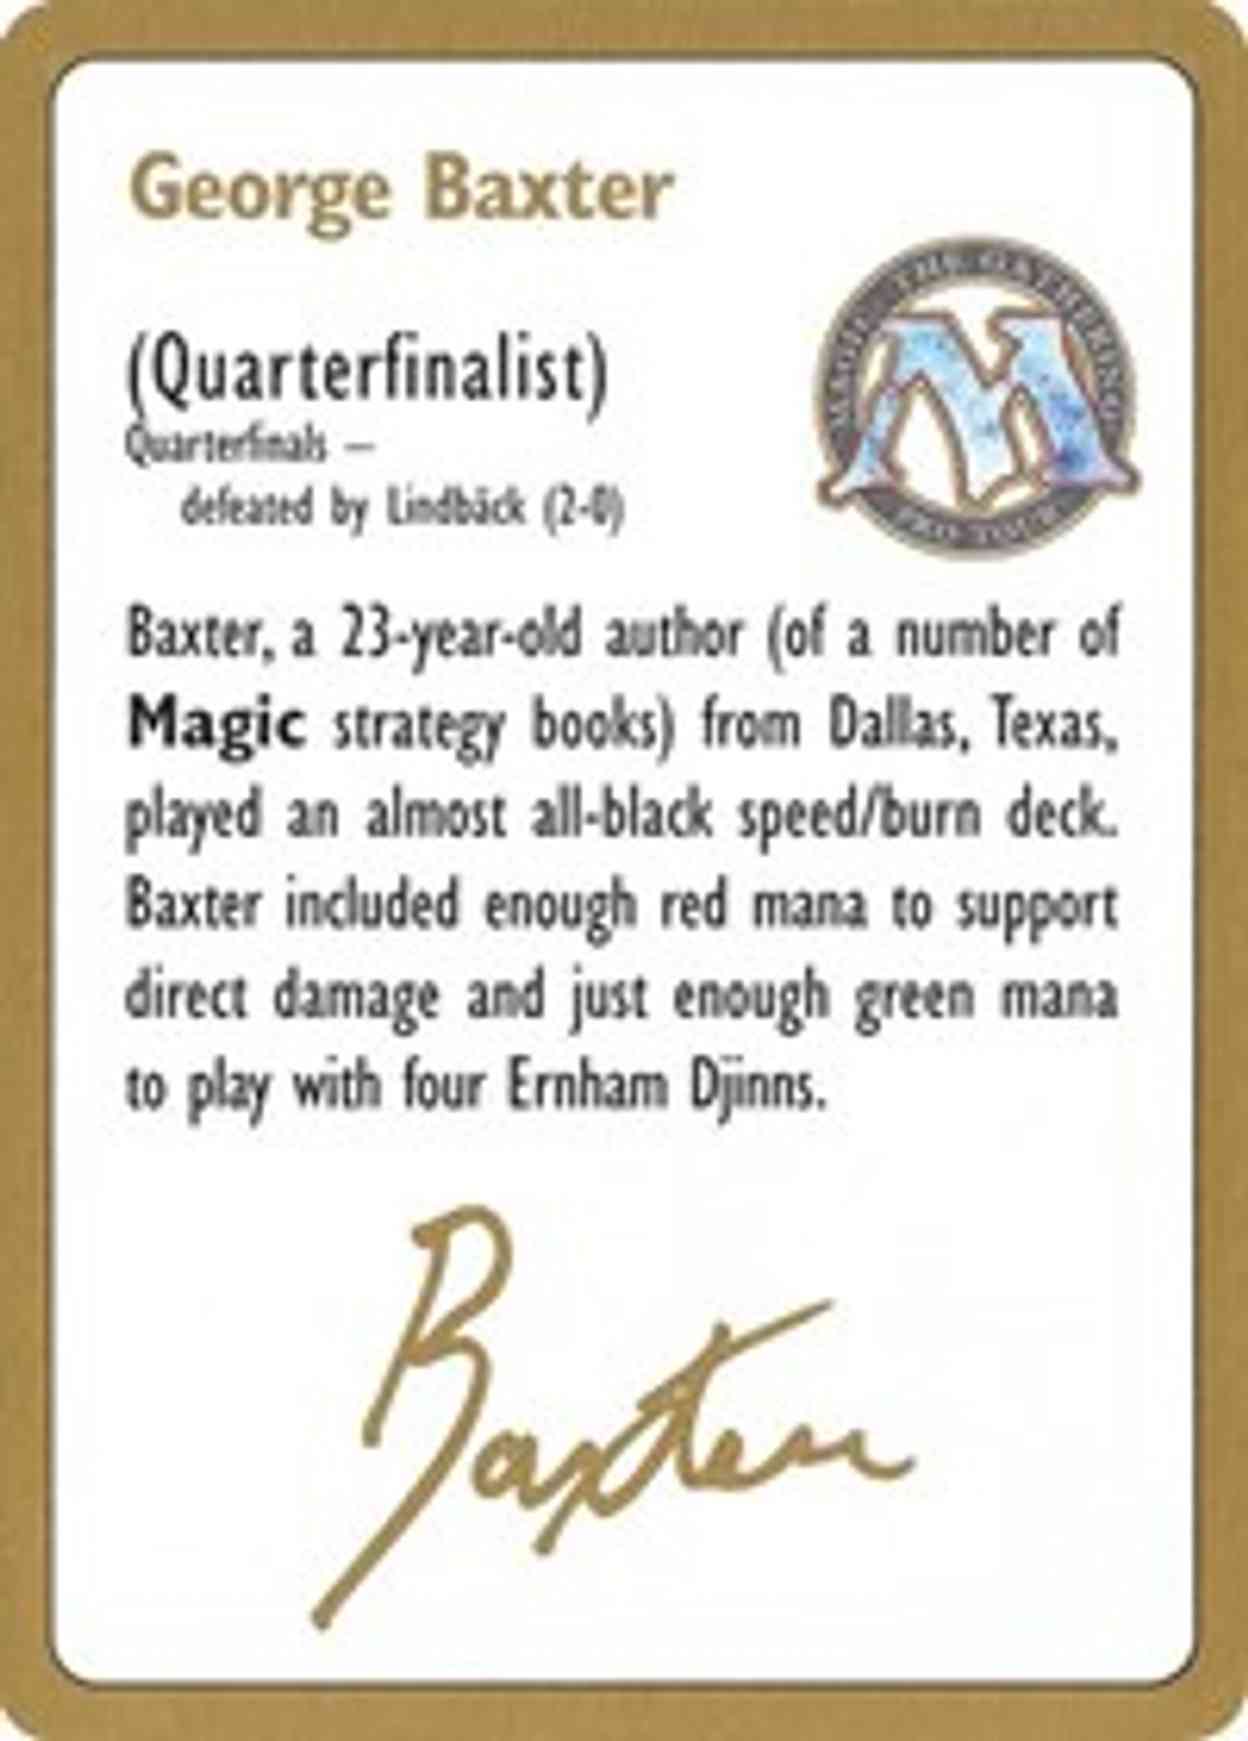 1996 George Baxter Biography Card magic card front